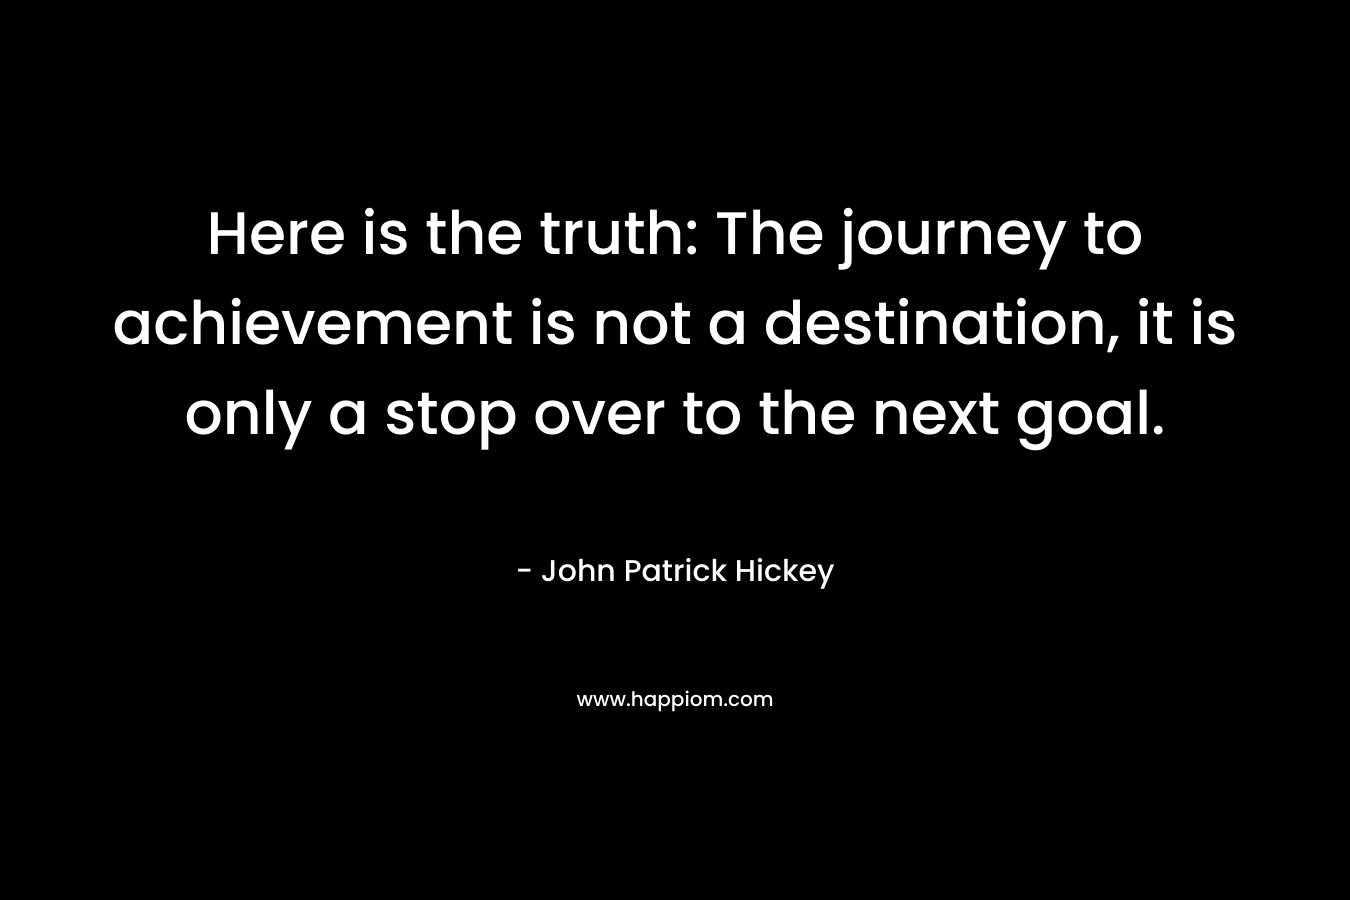 Here is the truth: The journey to achievement is not a destination, it is only a stop over to the next goal.